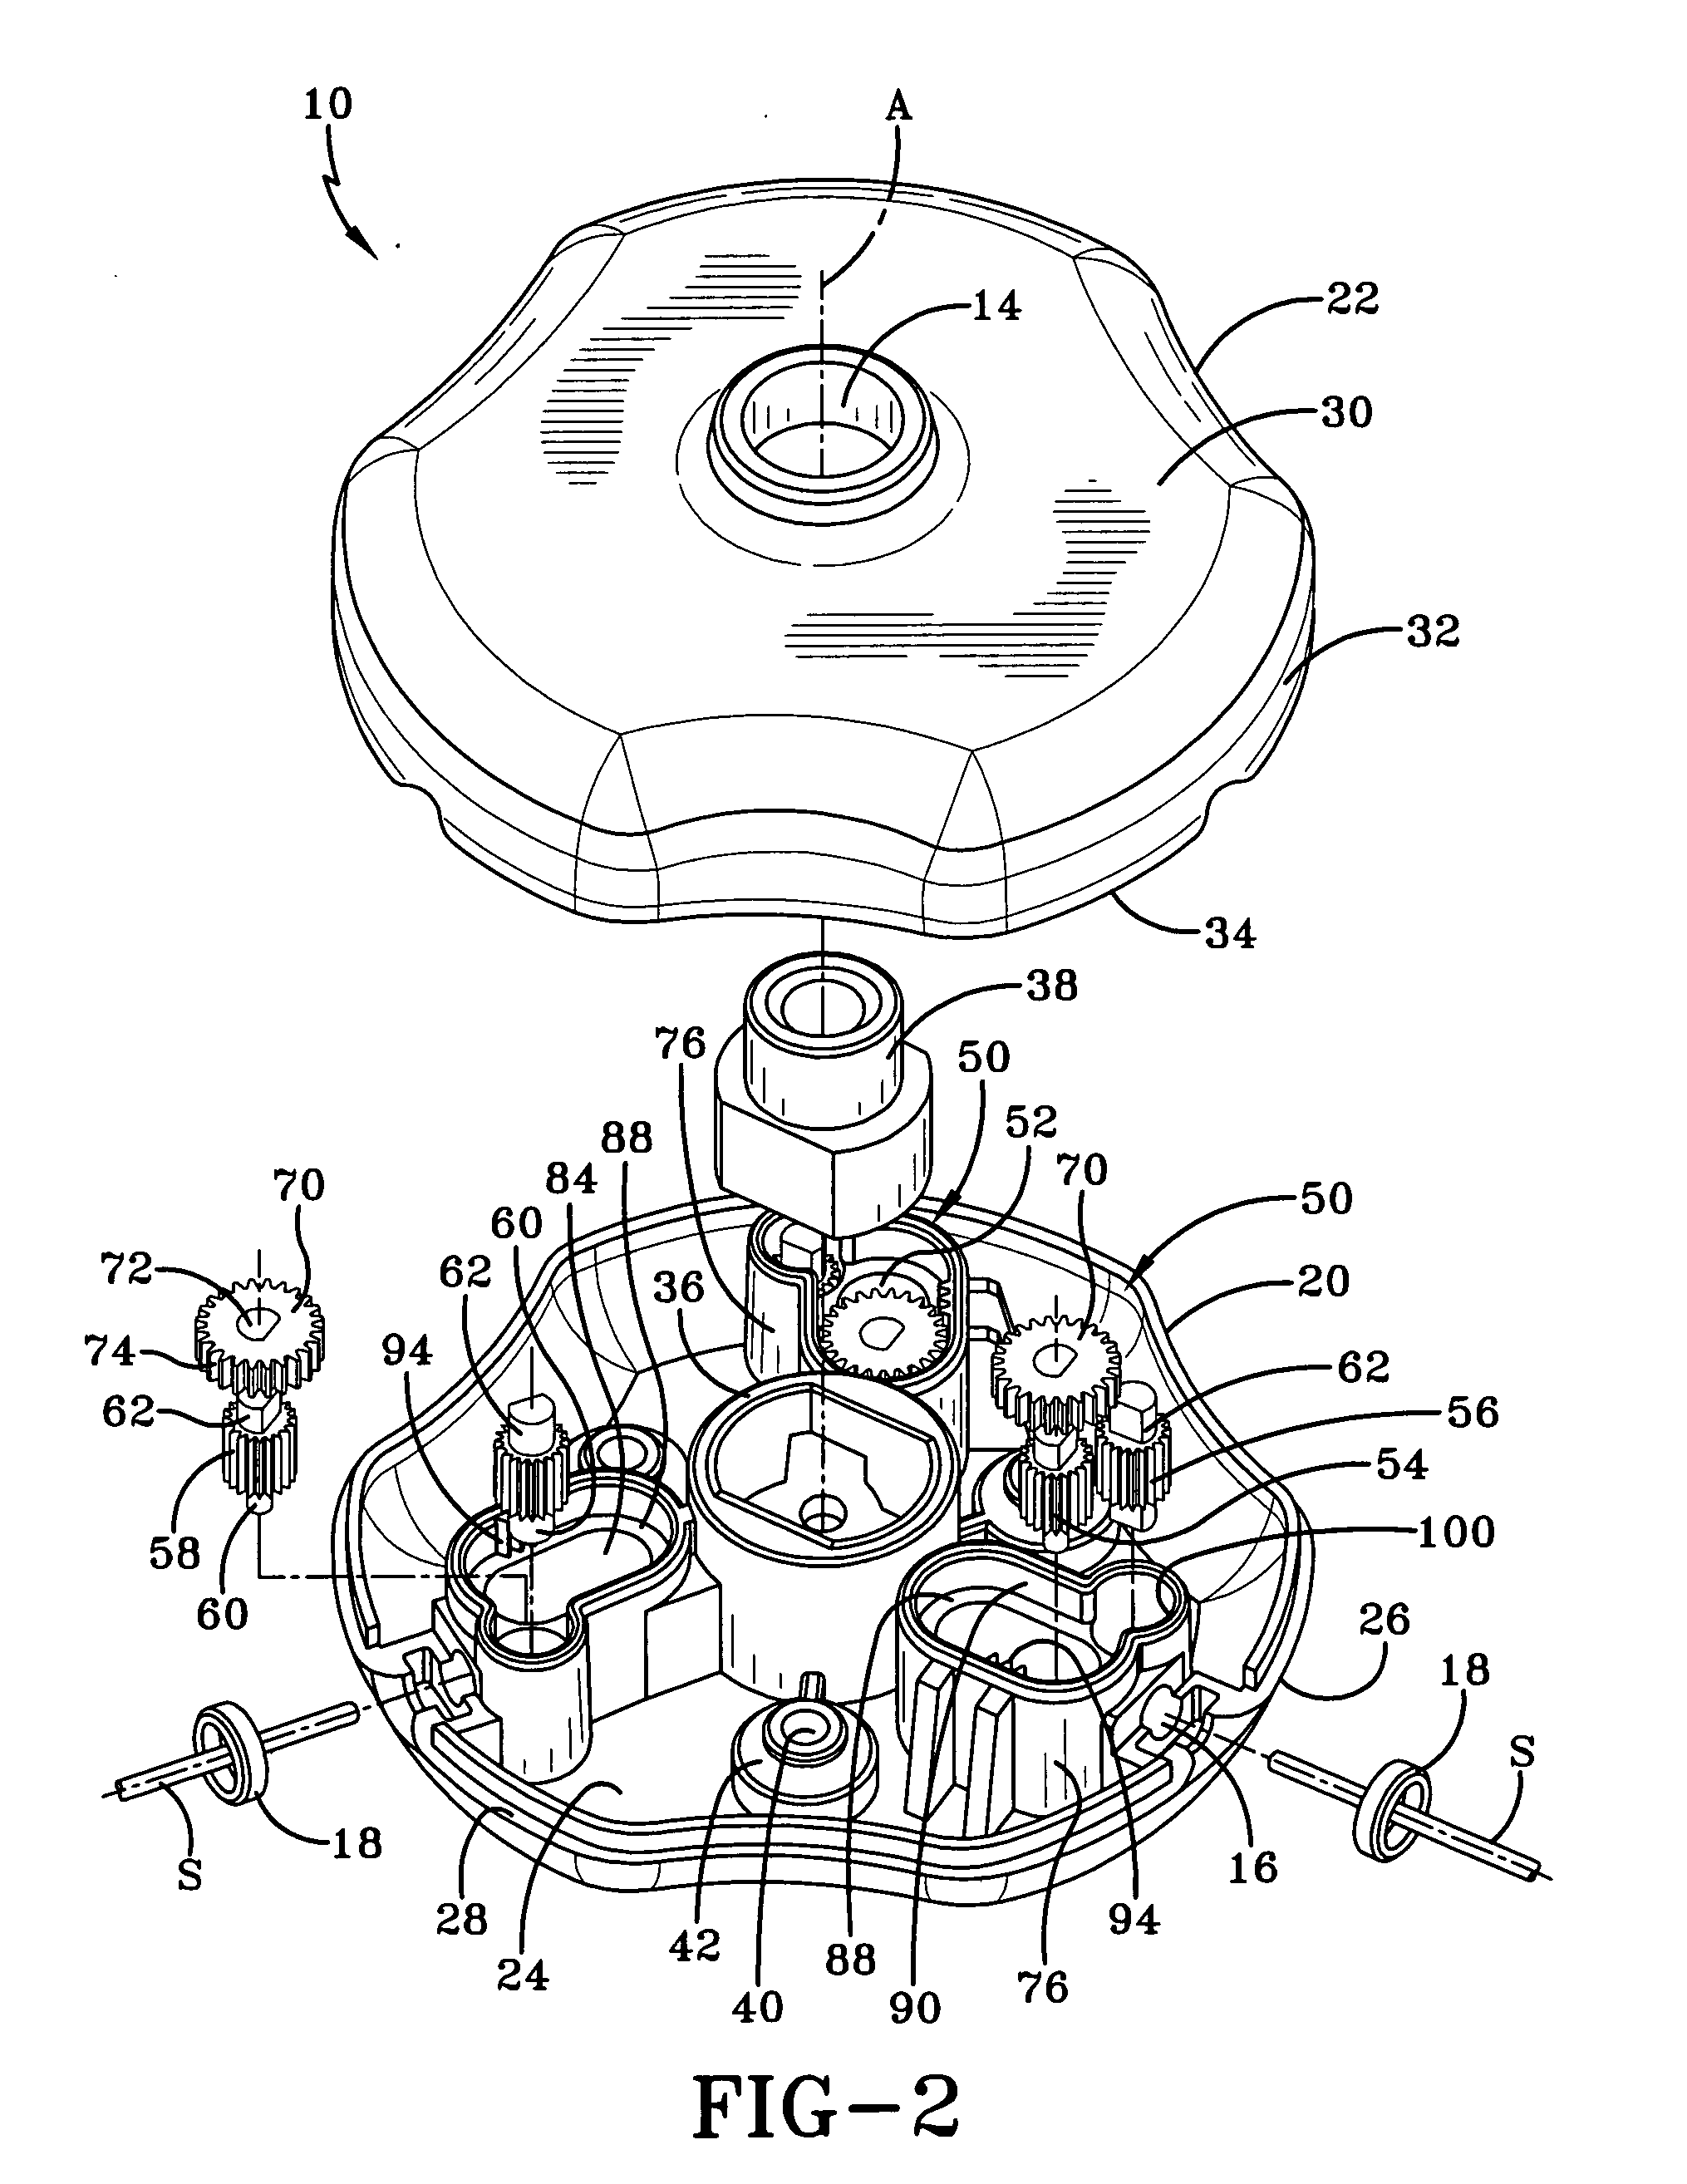 Mechanism for attaching trimmer line strips to a head of a trimming apparatus